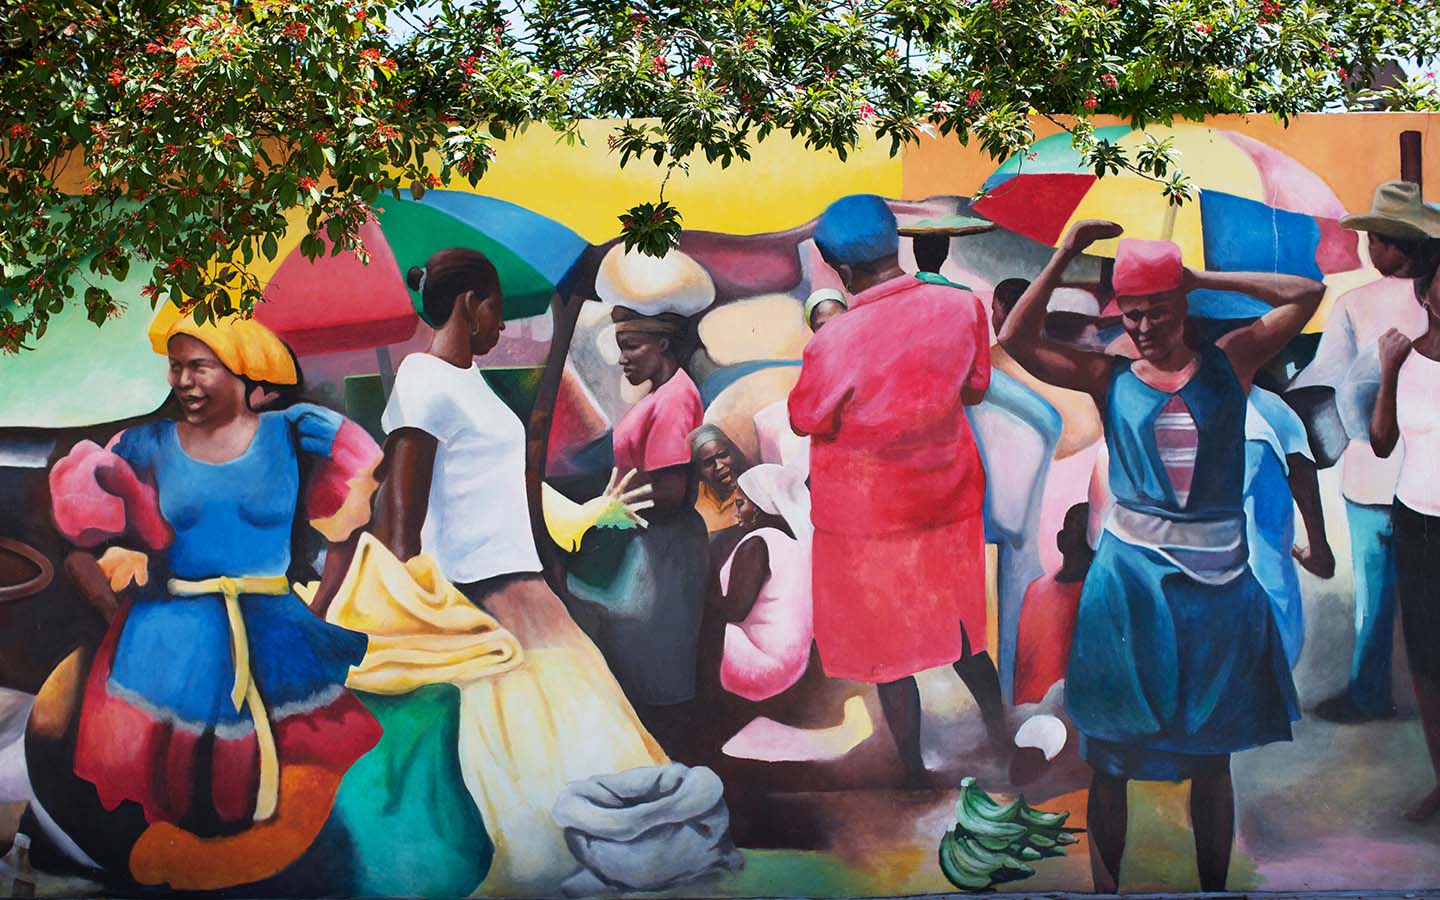 Colorful wall mural of street market found in Little Haiti